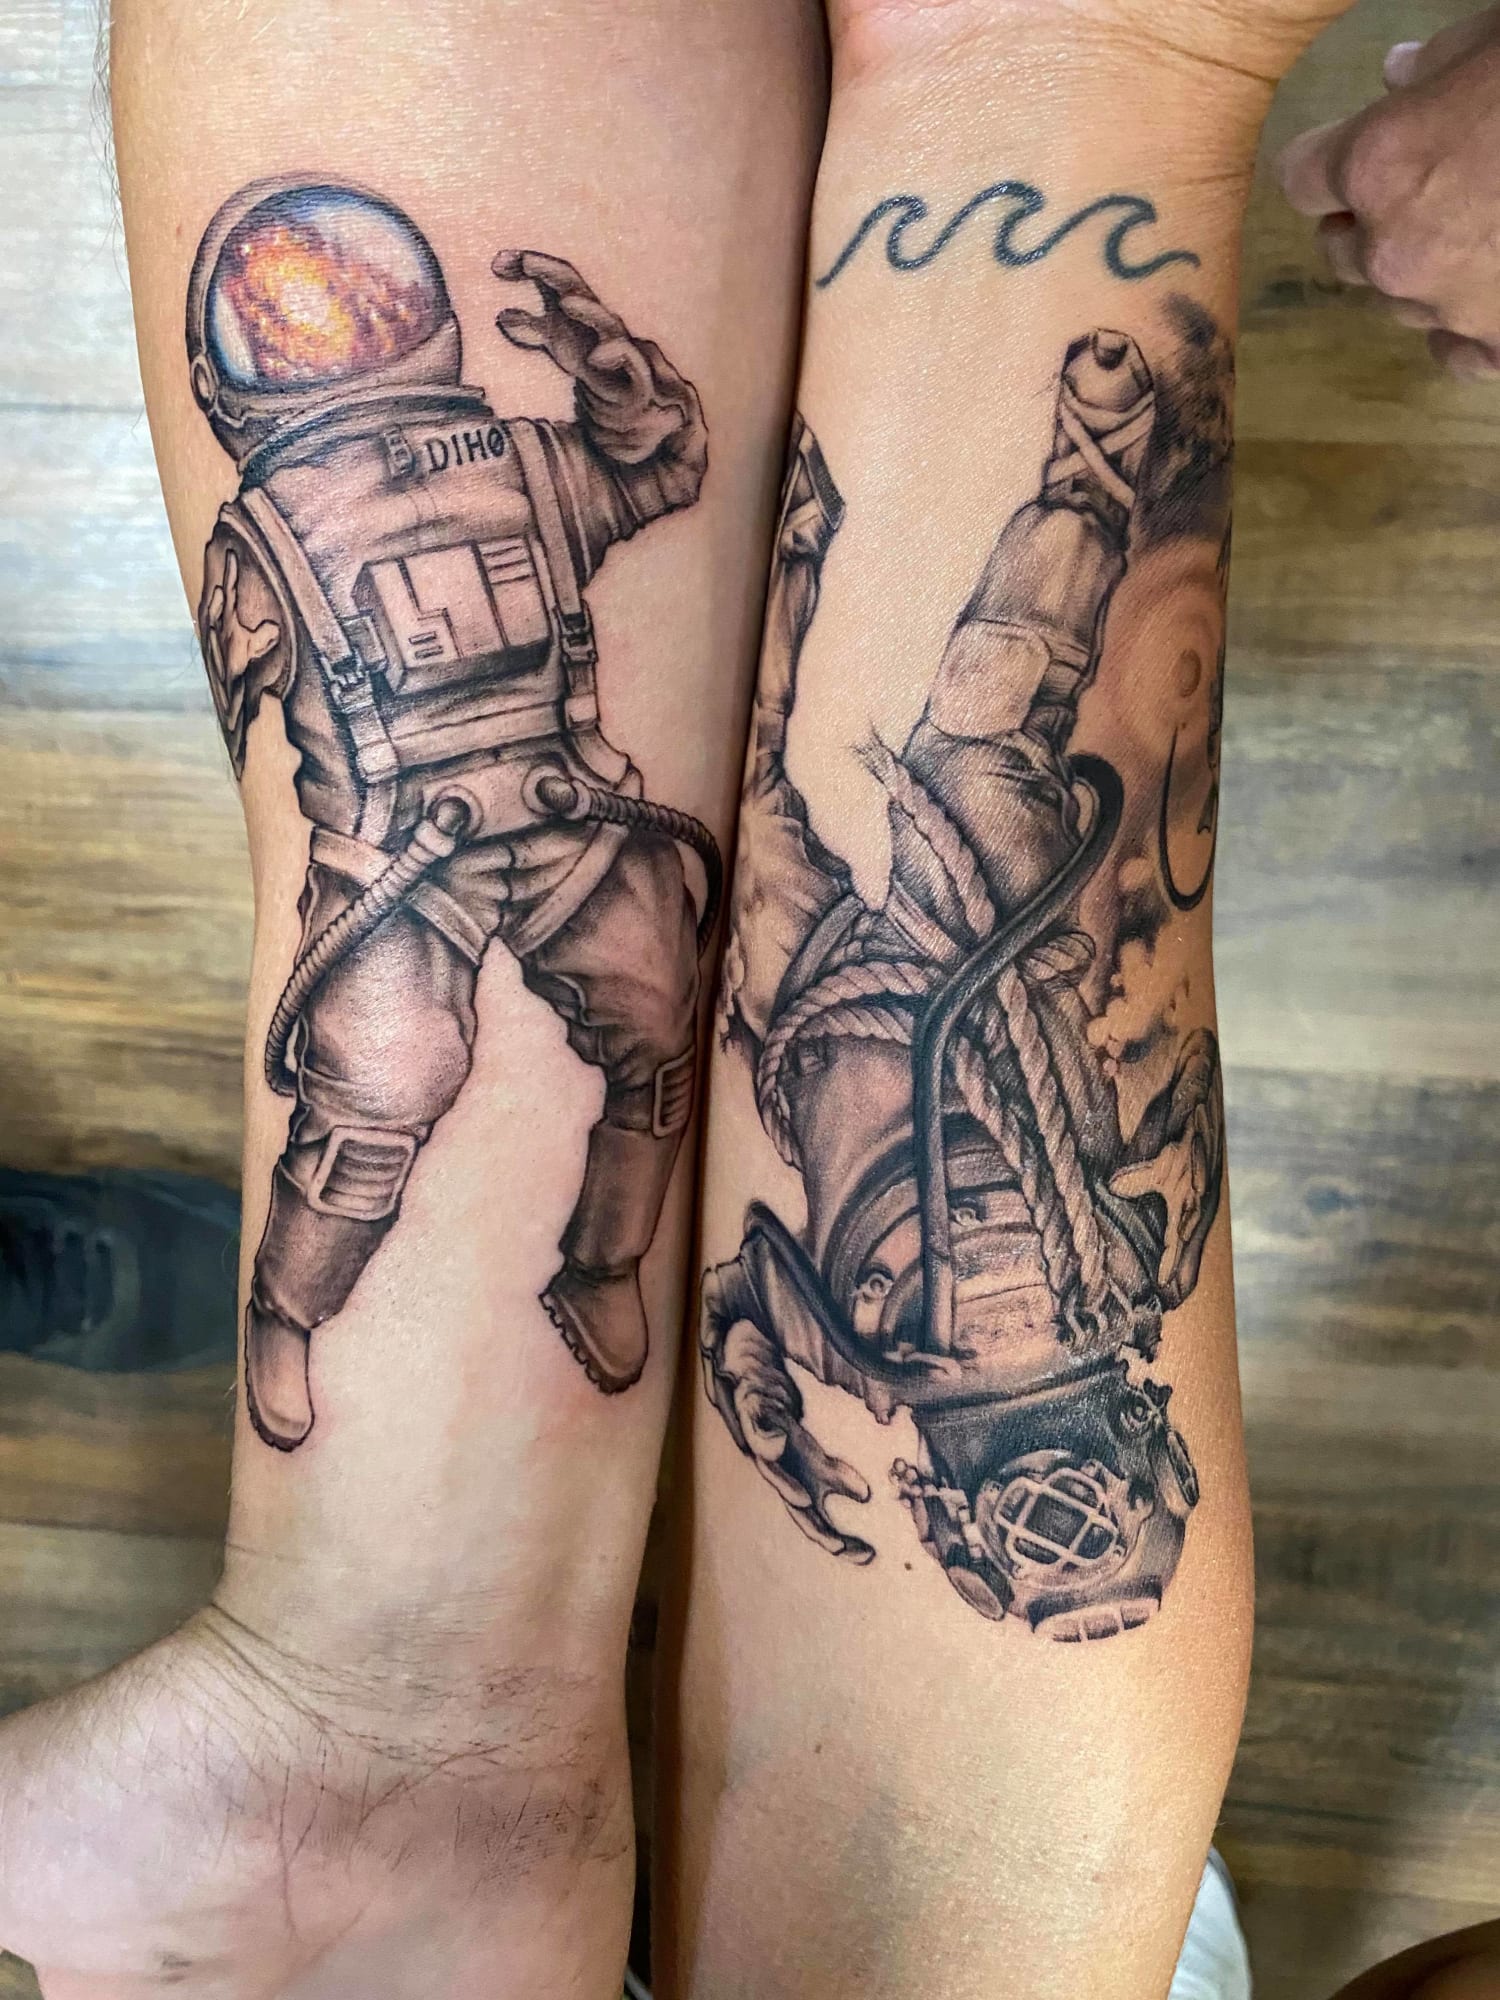 Finally popped the cherry and got my first tattoo Beautiful astronaut done  by Curt Sage  Tattoos Forever in Fort Walton Beach FL  rtattoos